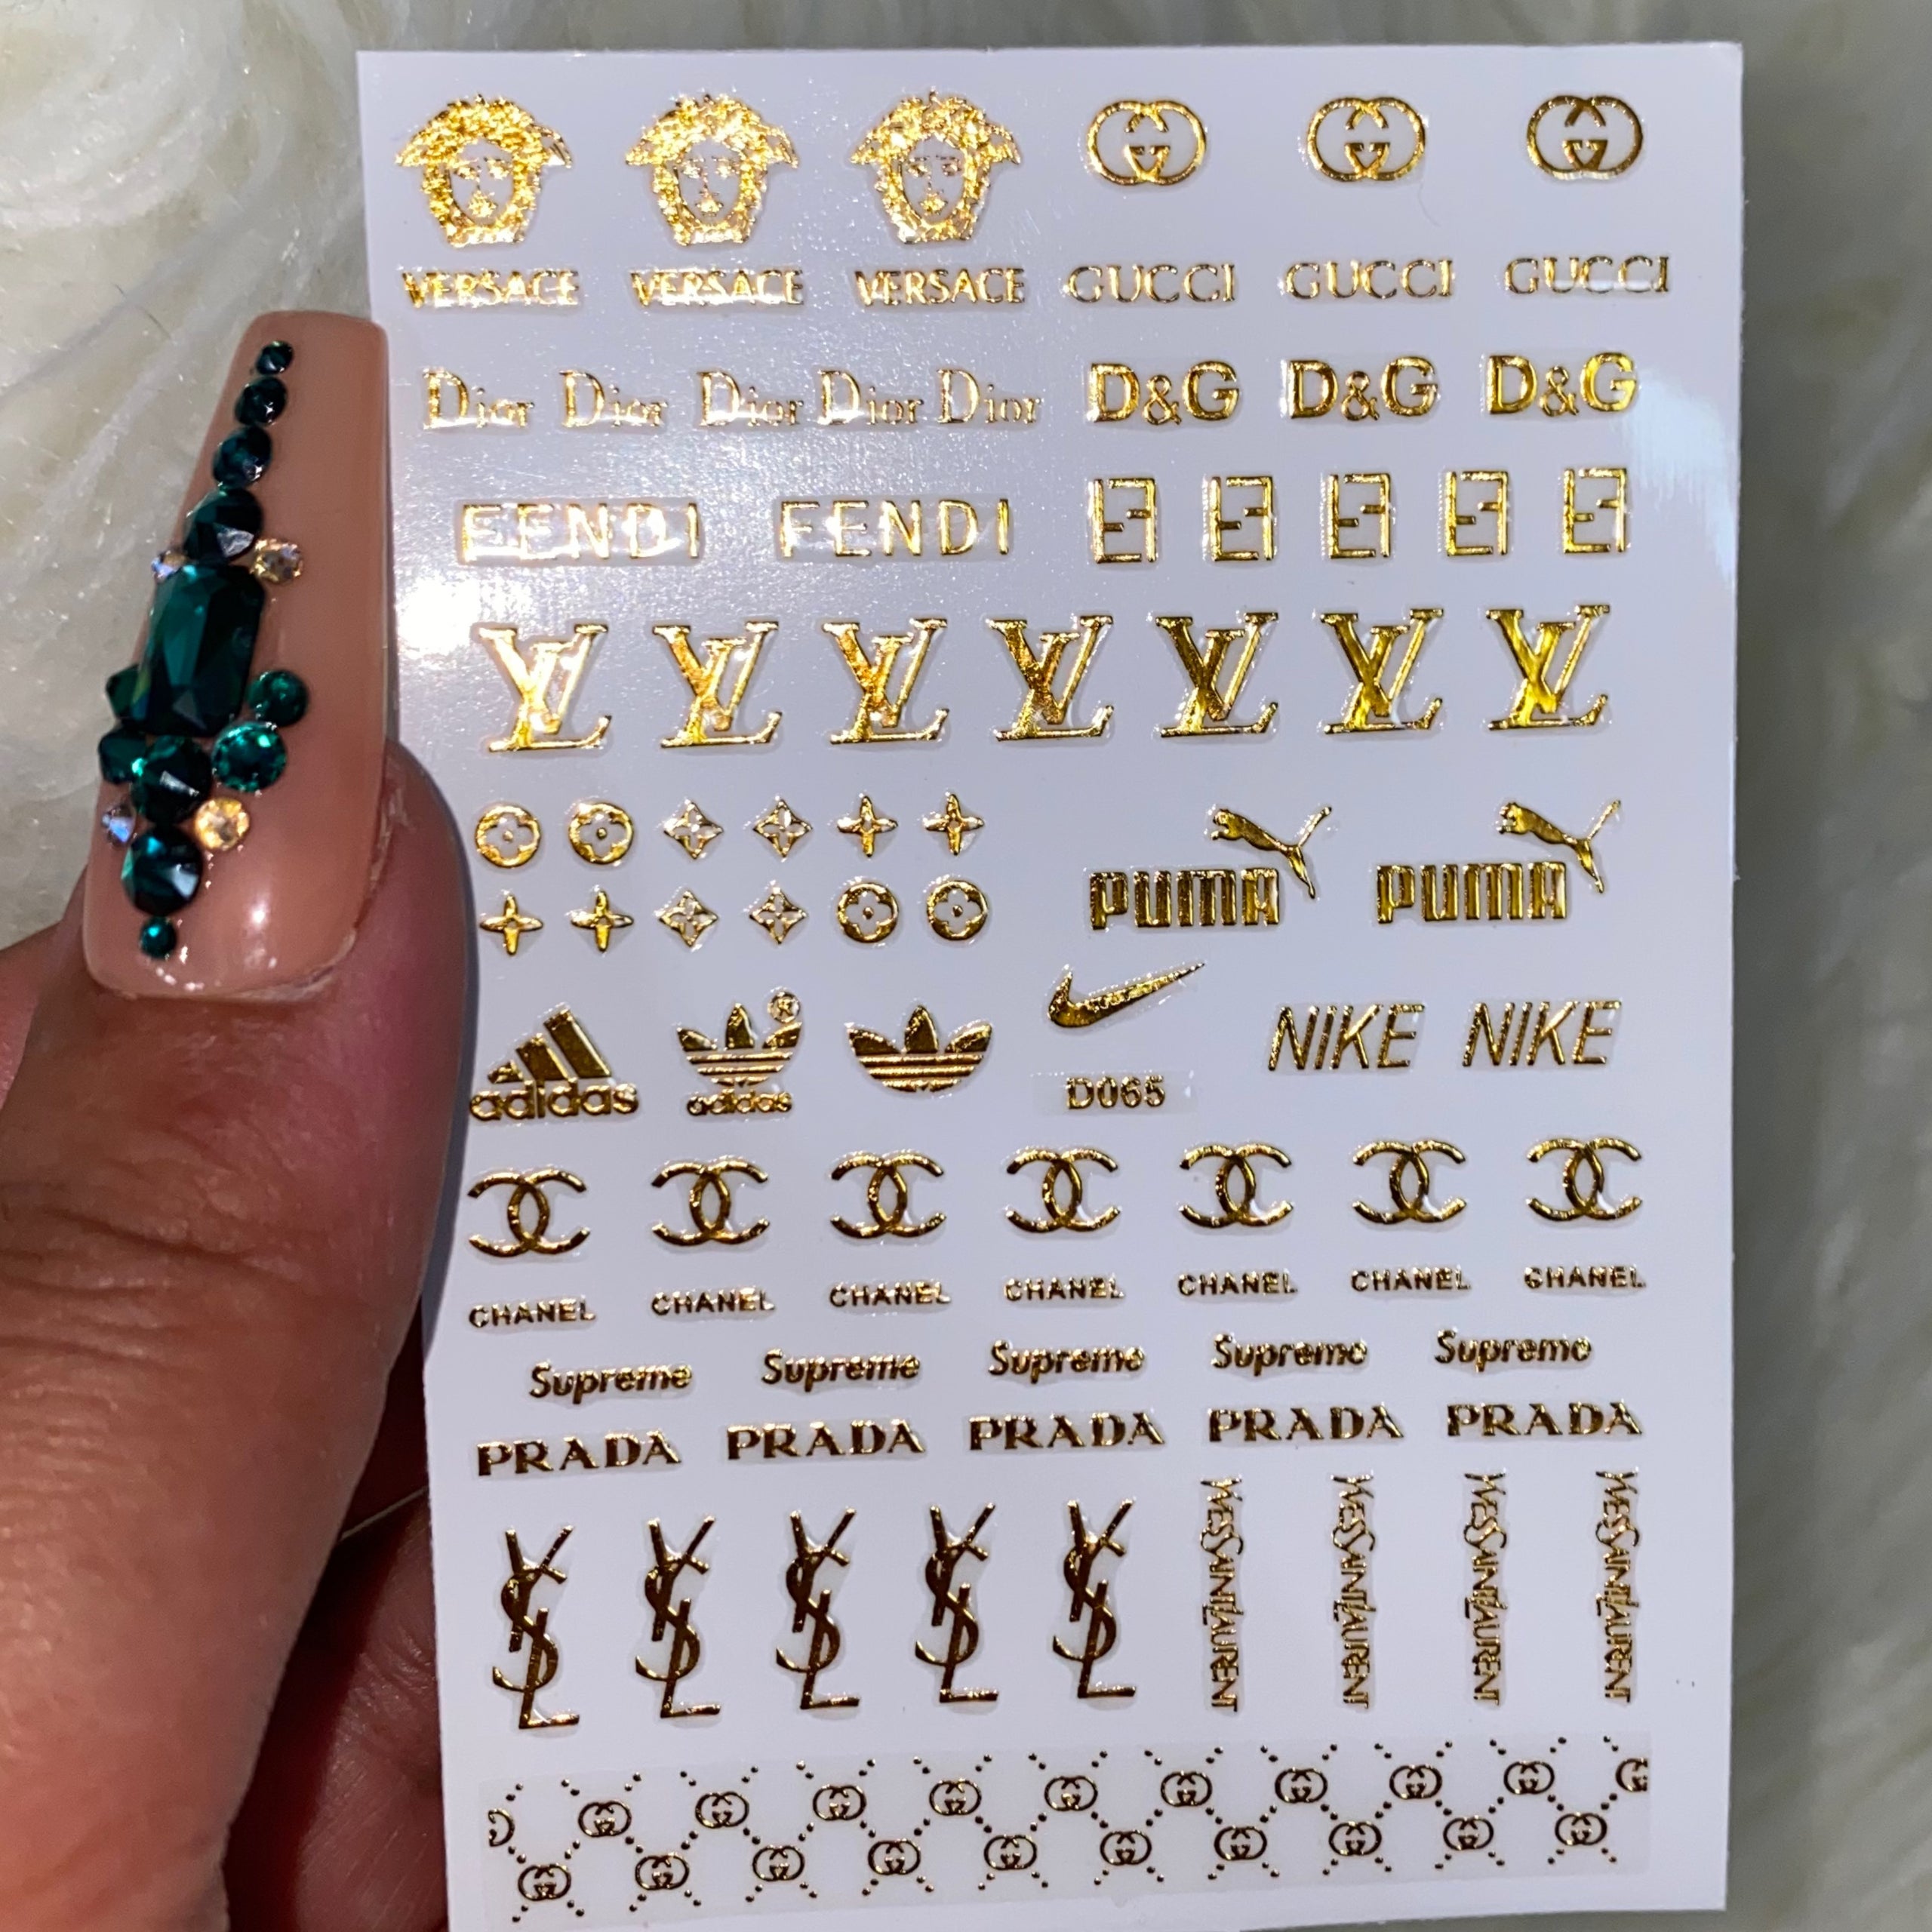 NAIL STICKER Brands Name, Gold CHANEL #D041